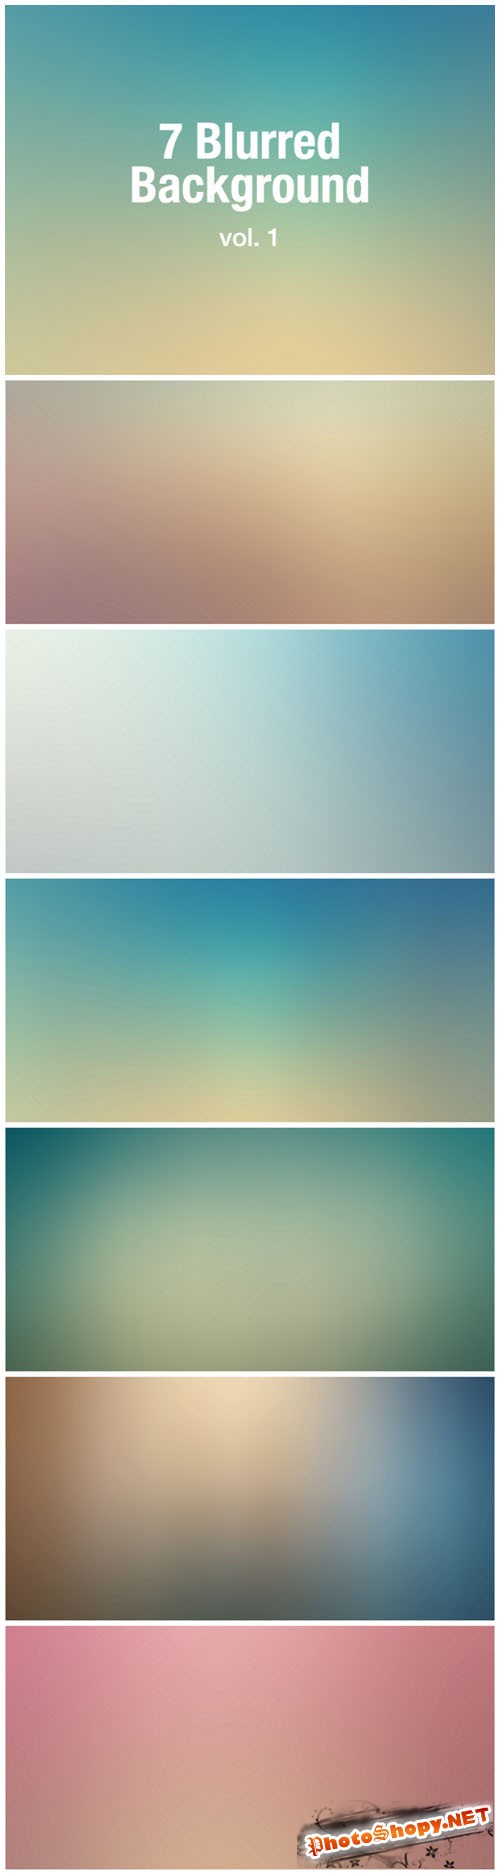 7 Colored Blurred Backgrounds Vol.1